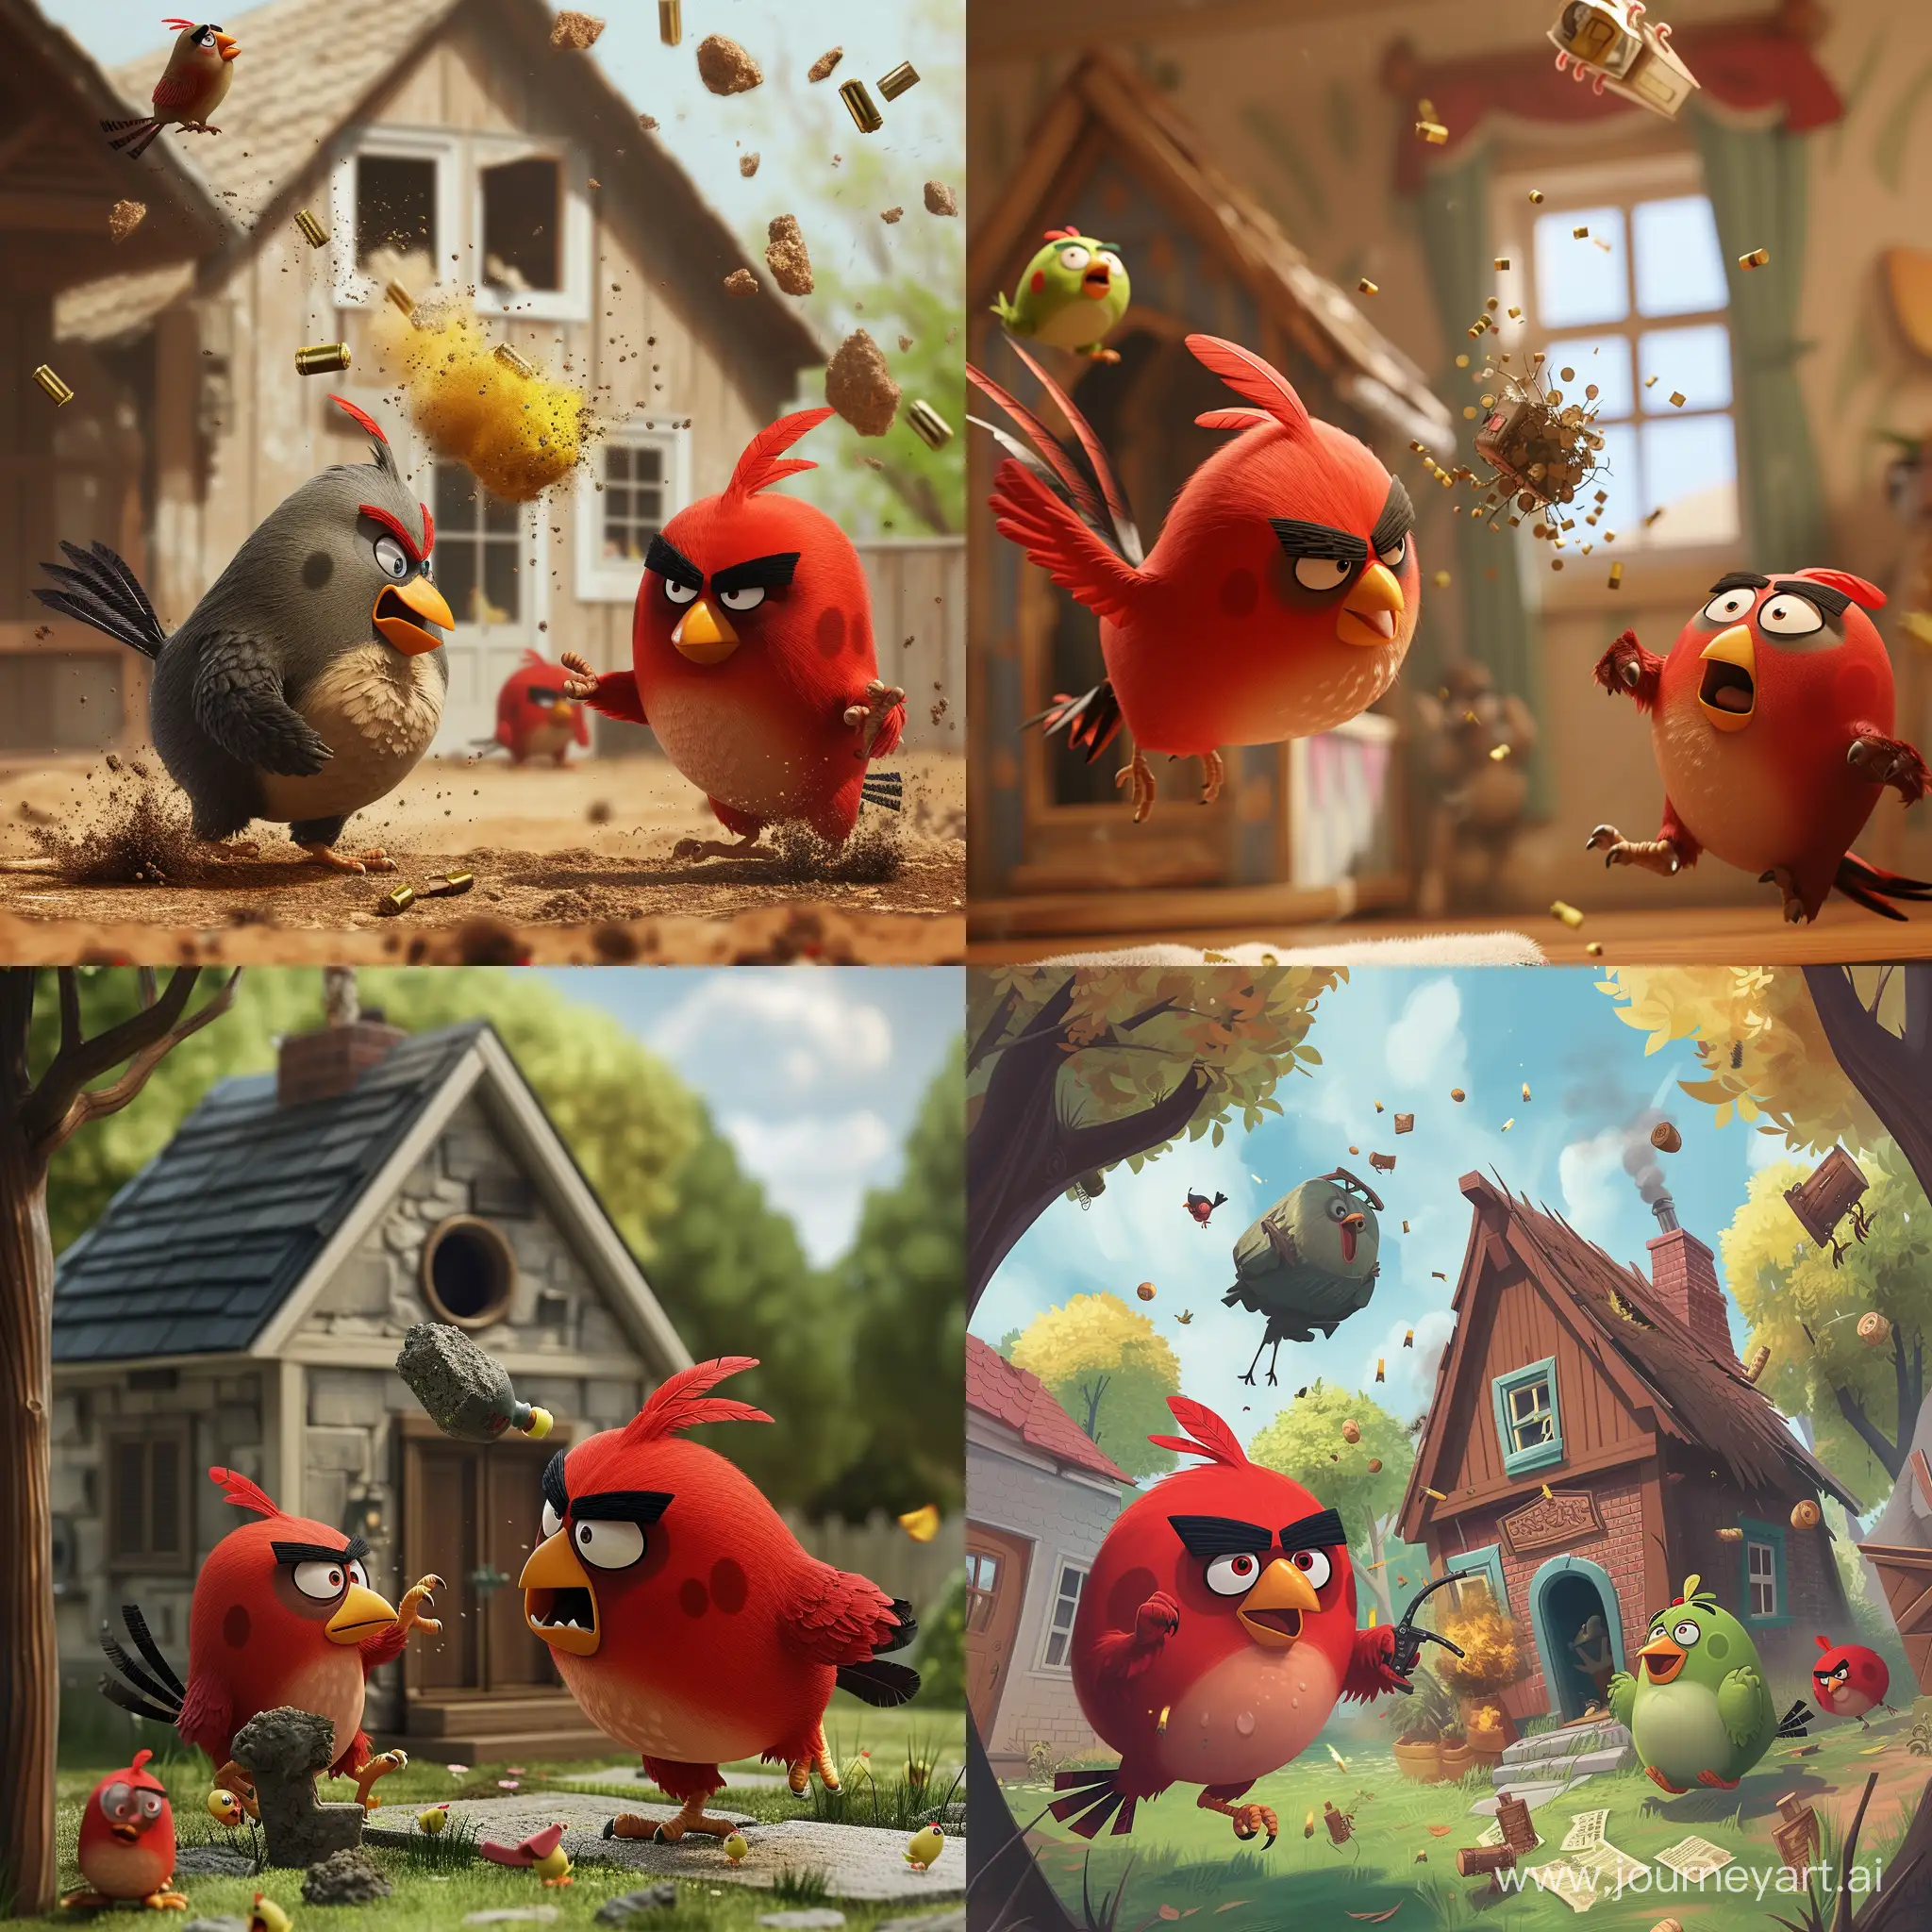 Angry birds throwing a grenade in house of Donald Tramp
